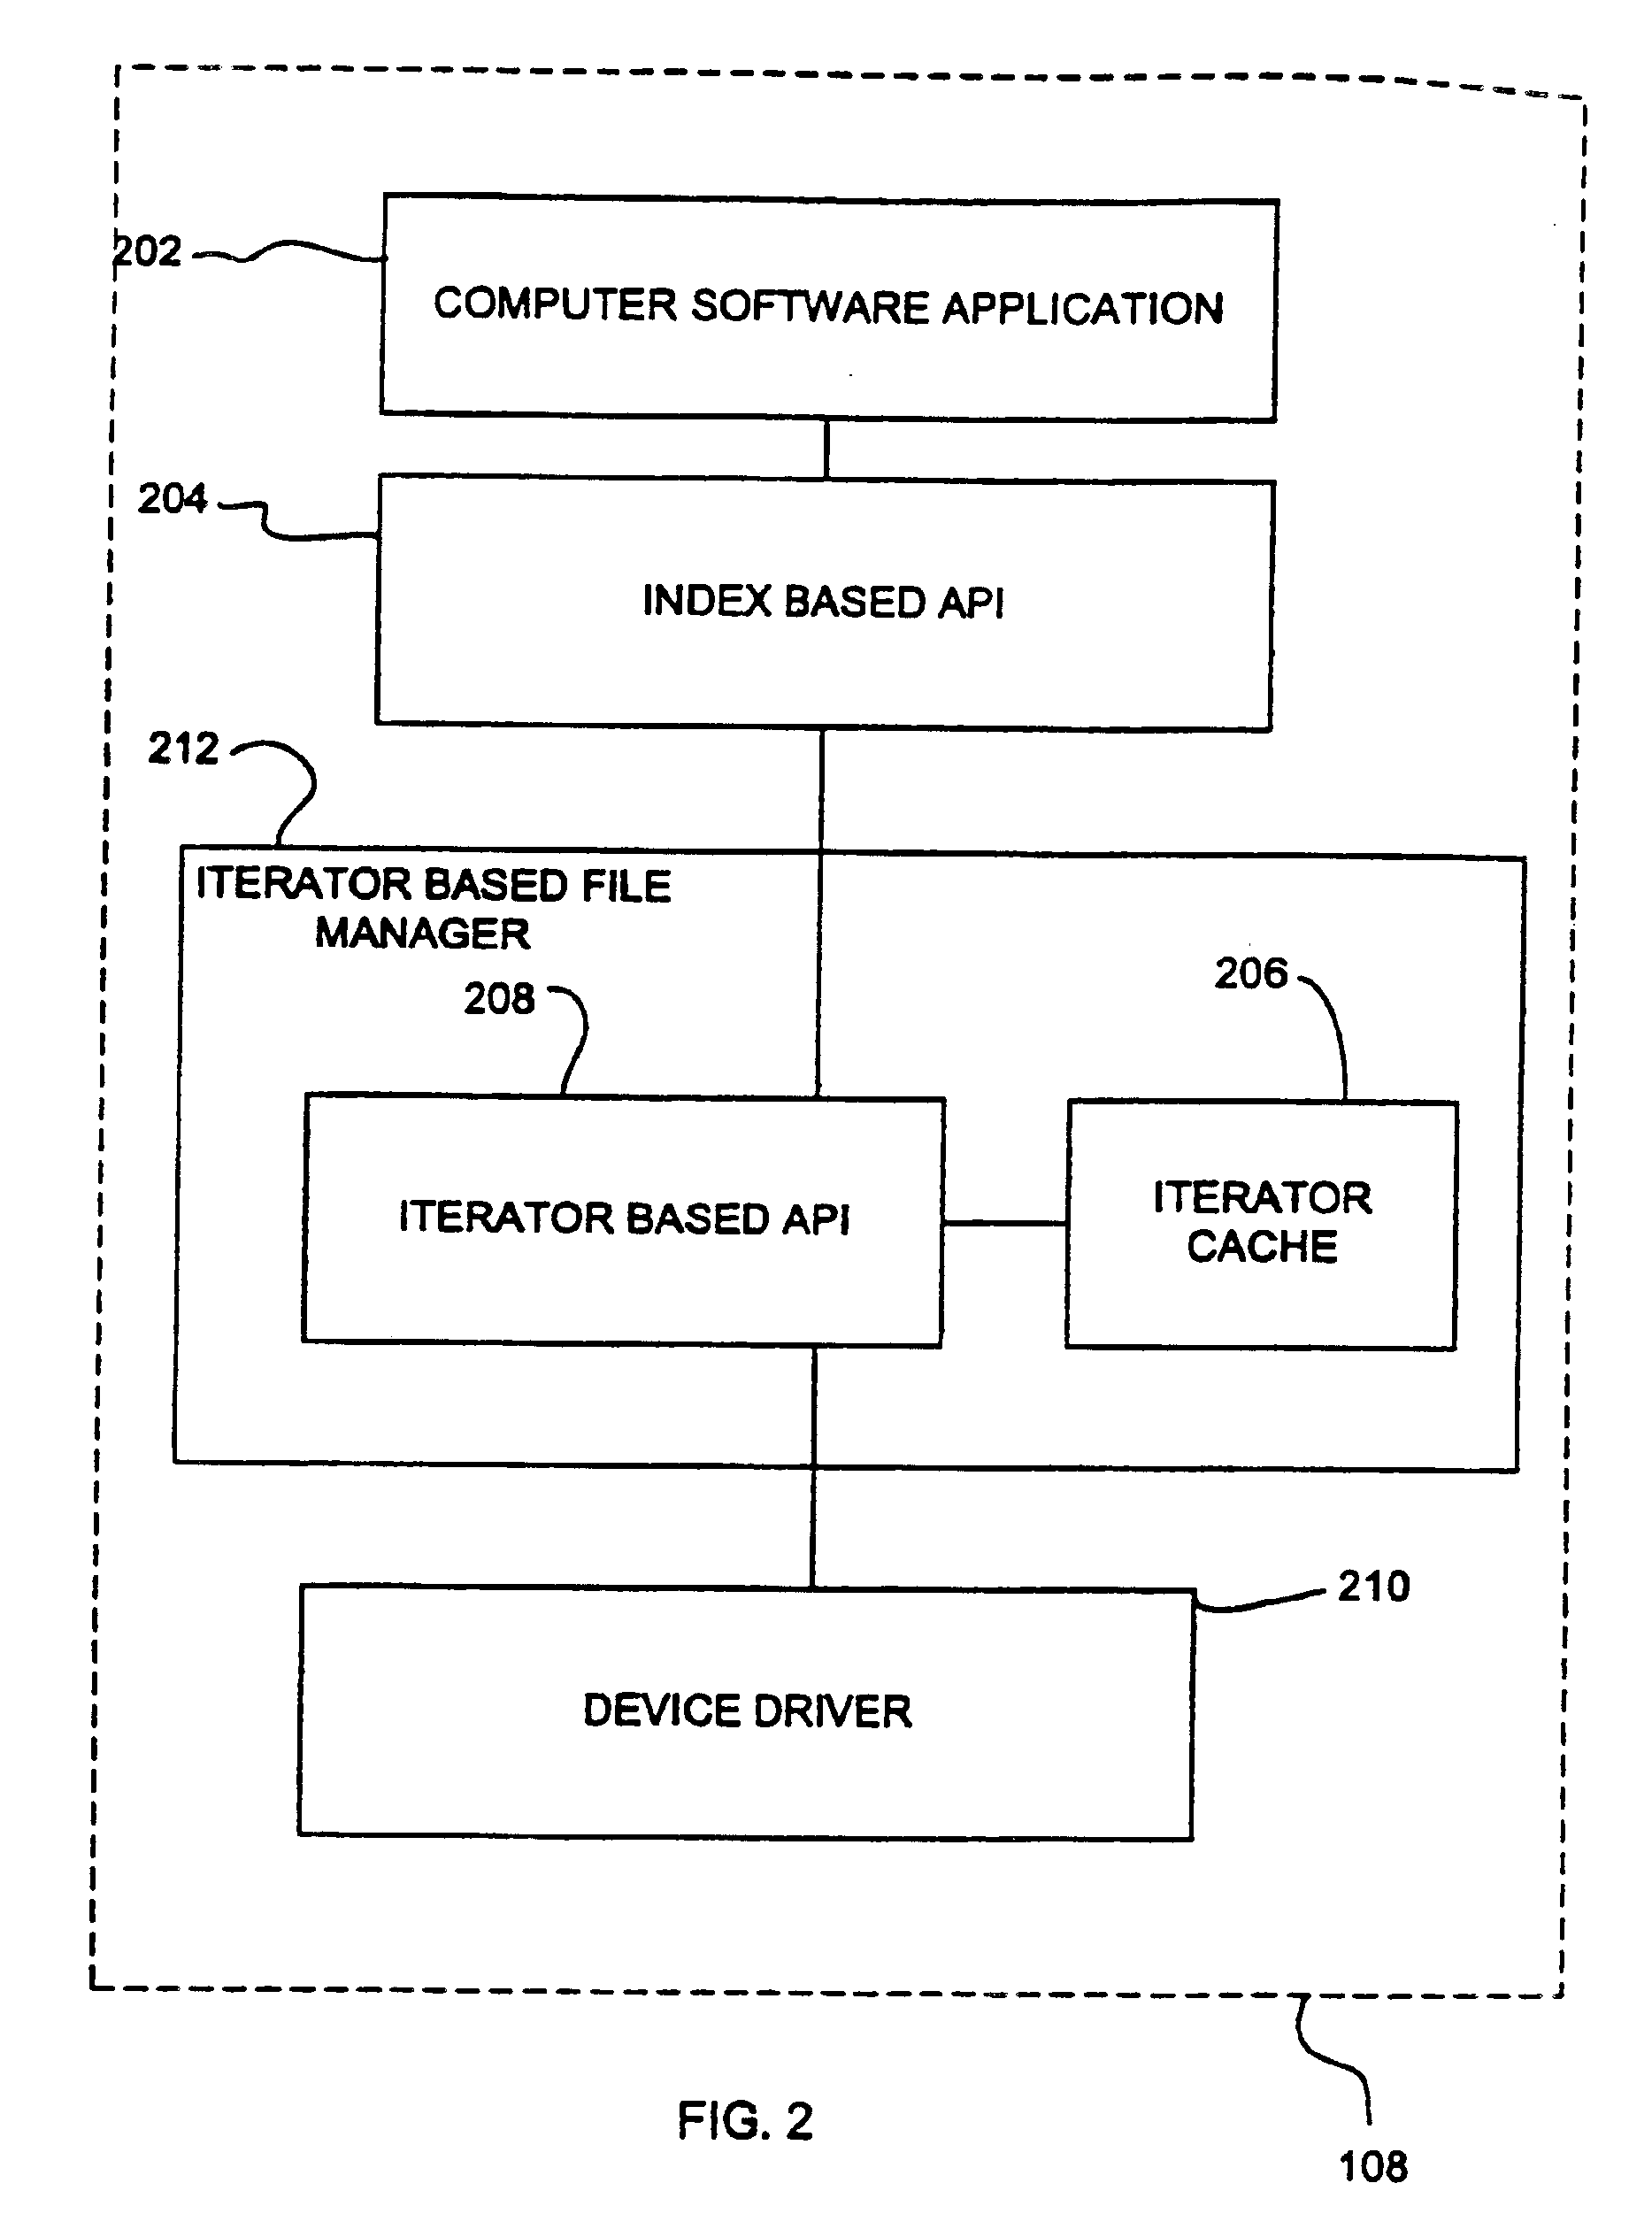 System and method for interfacing index based and iterator based application programming interfaces